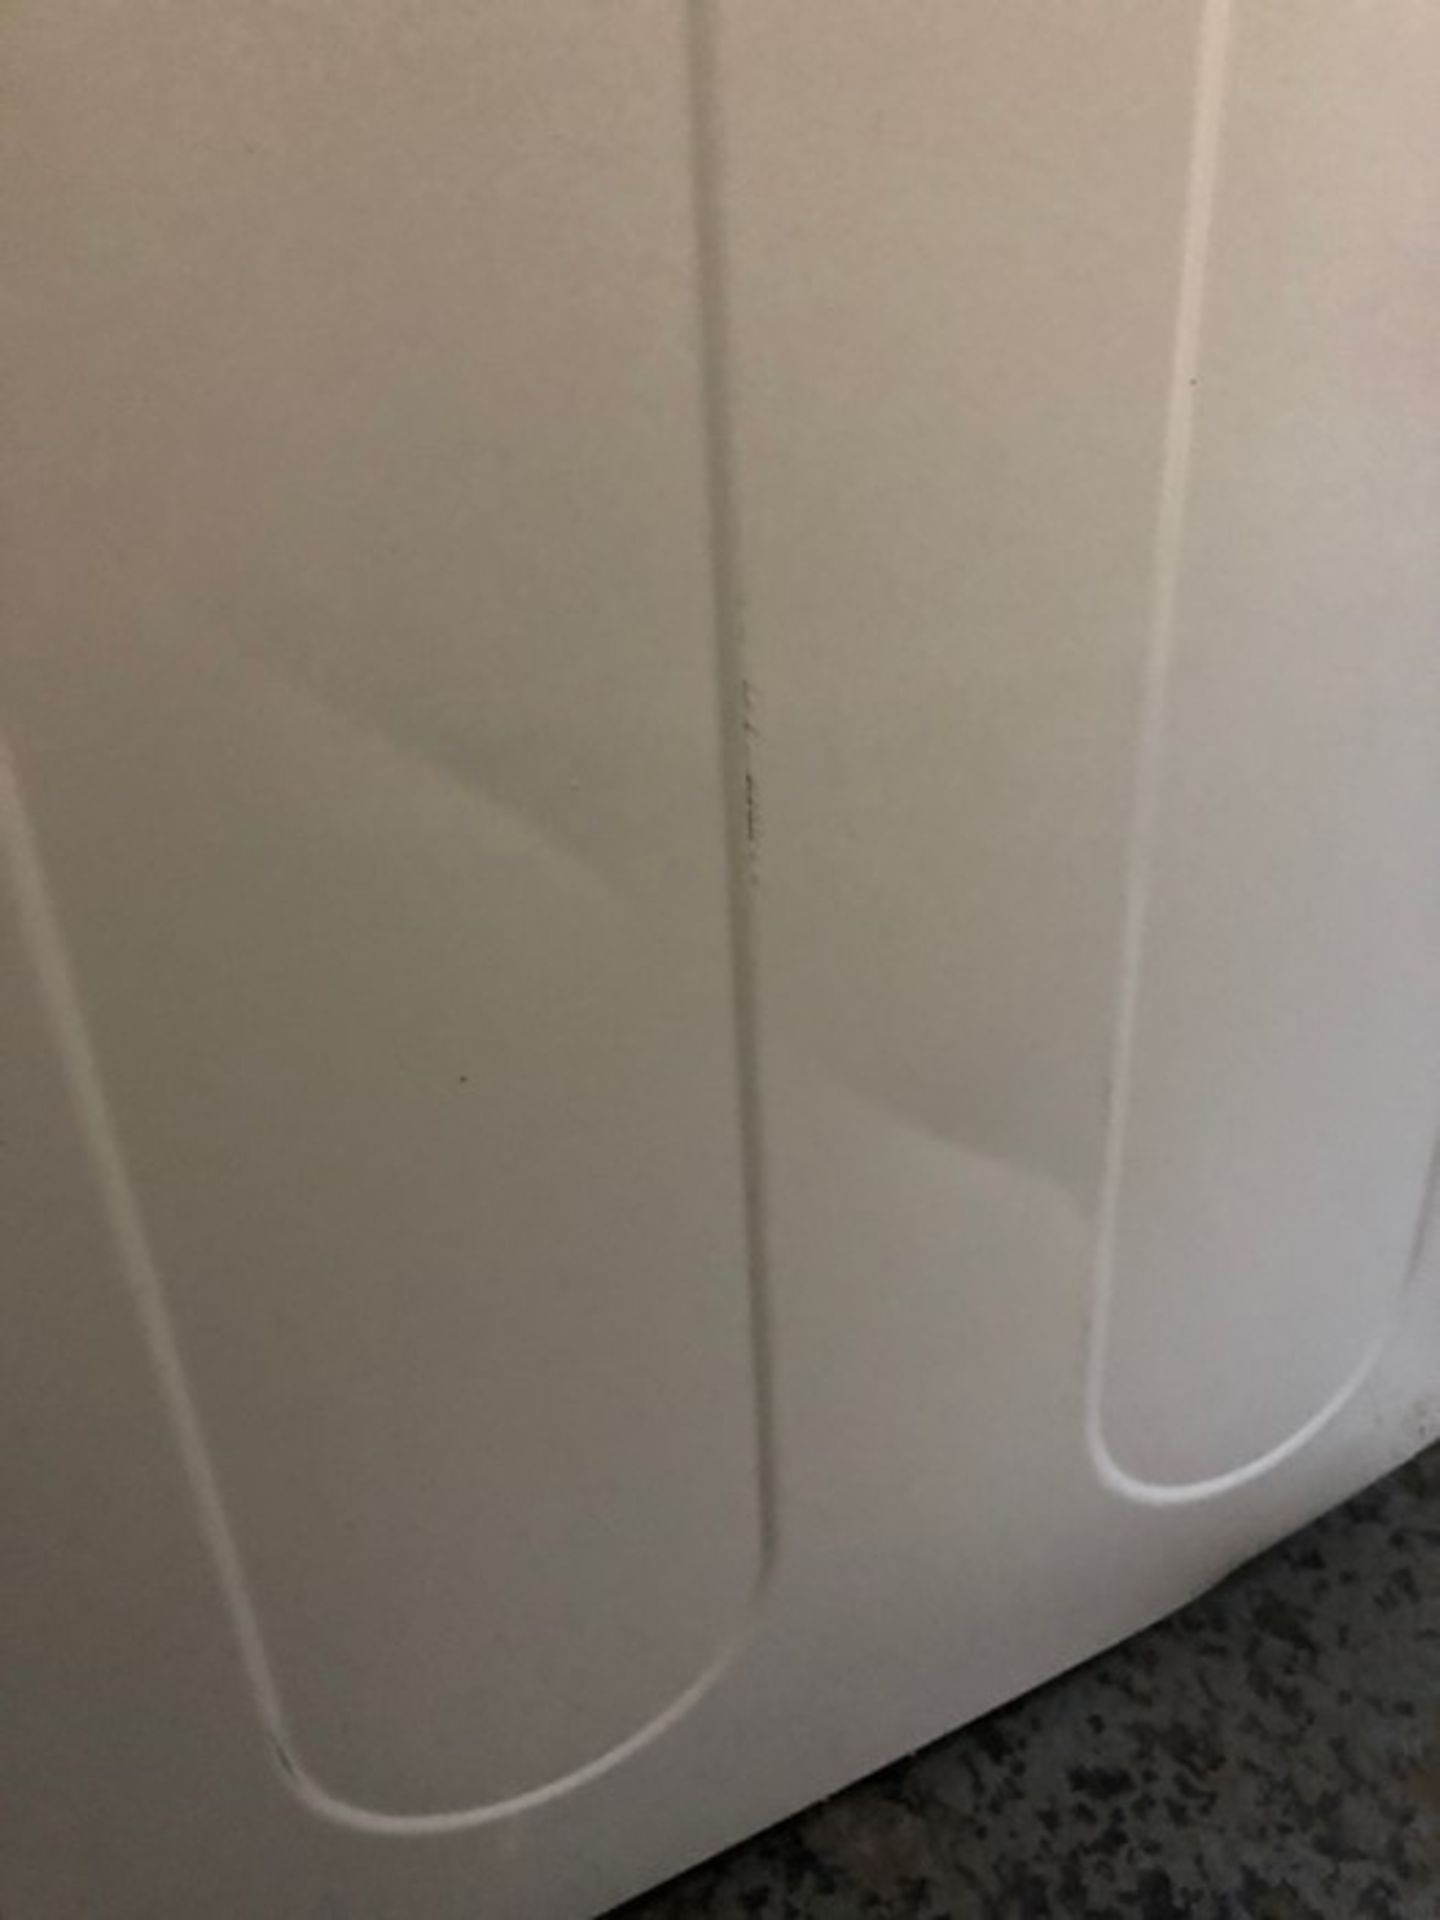 HOTPOINT VENTED TUMBLE DRYER - FETV60CP / RRP £209.99 / UNTESTED, UNUSED. COSMETIC DAMAGE, ONE - Image 5 of 5